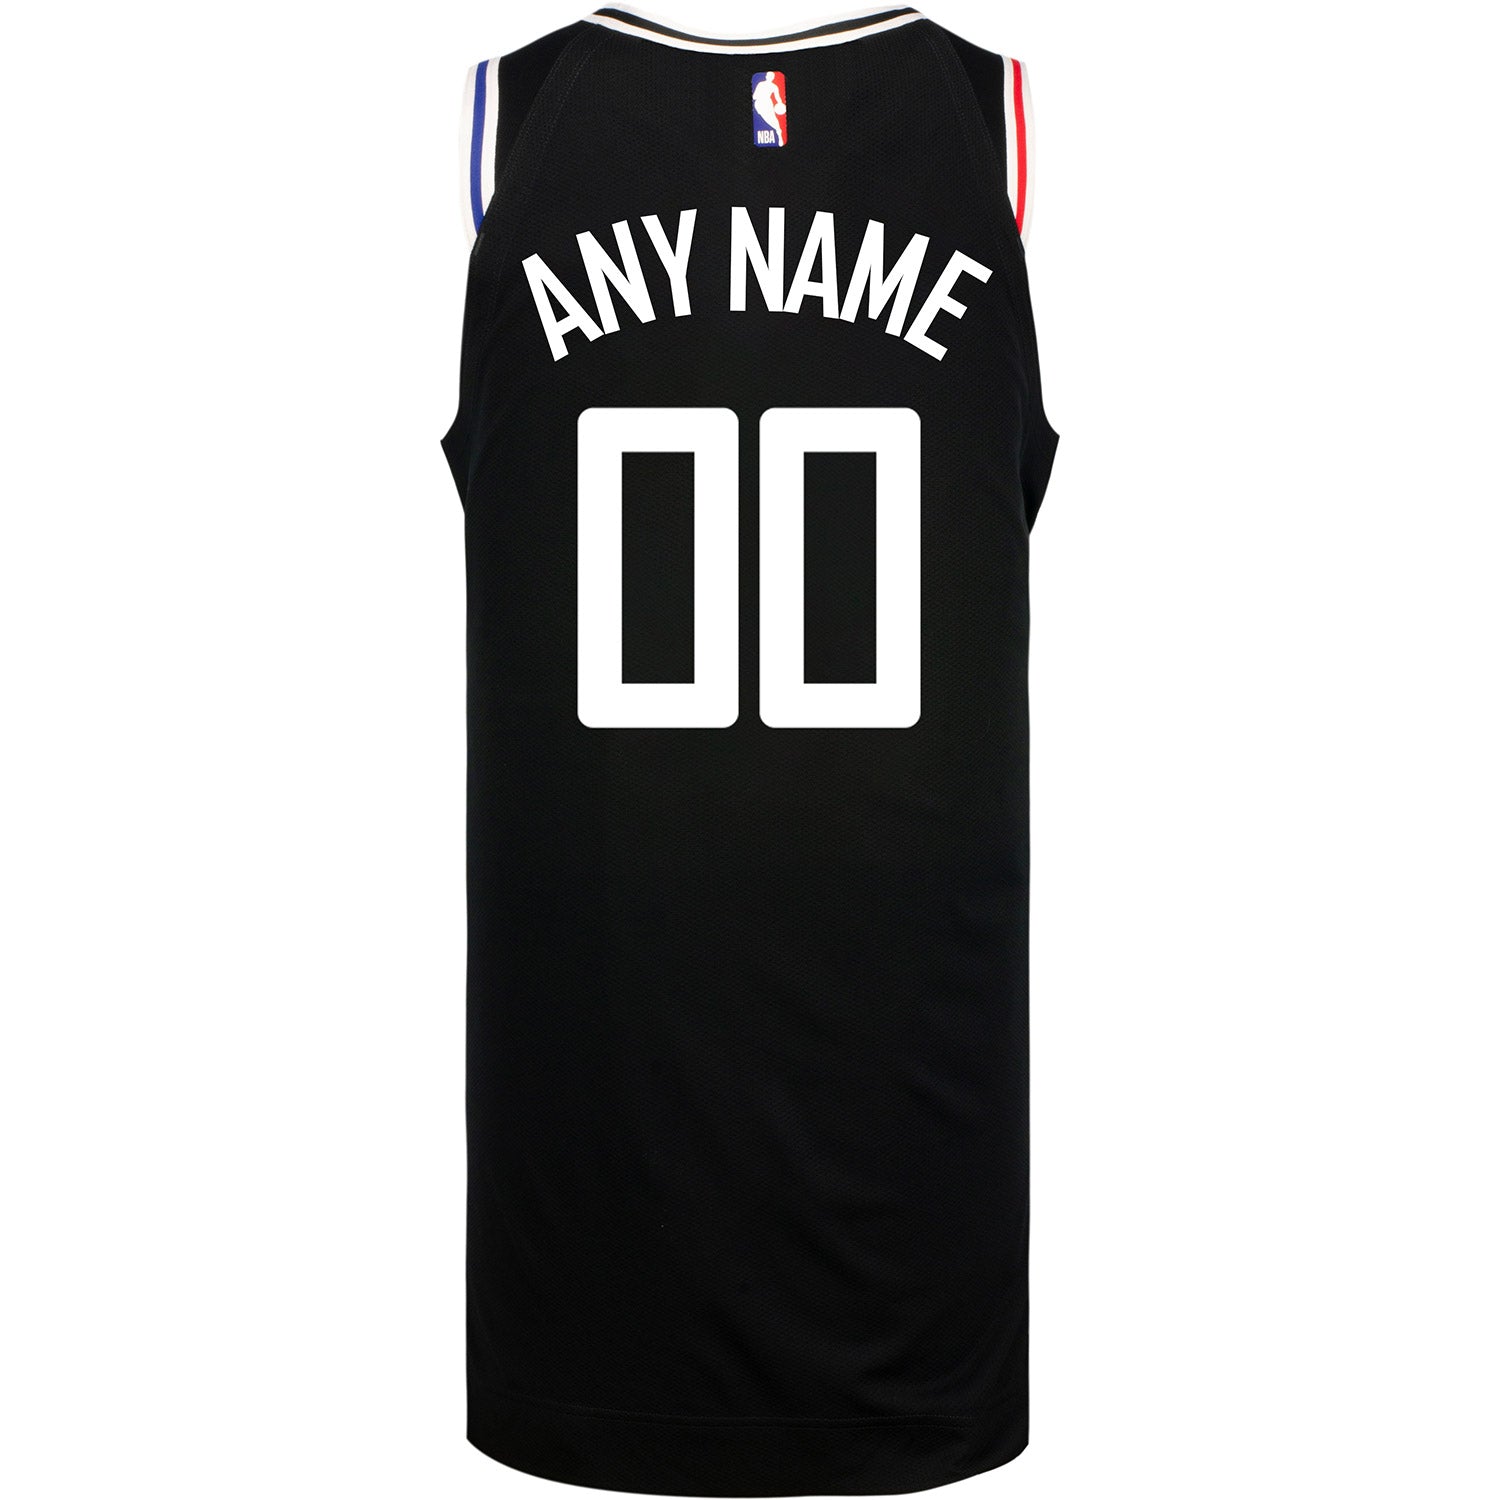 clippers jersey white